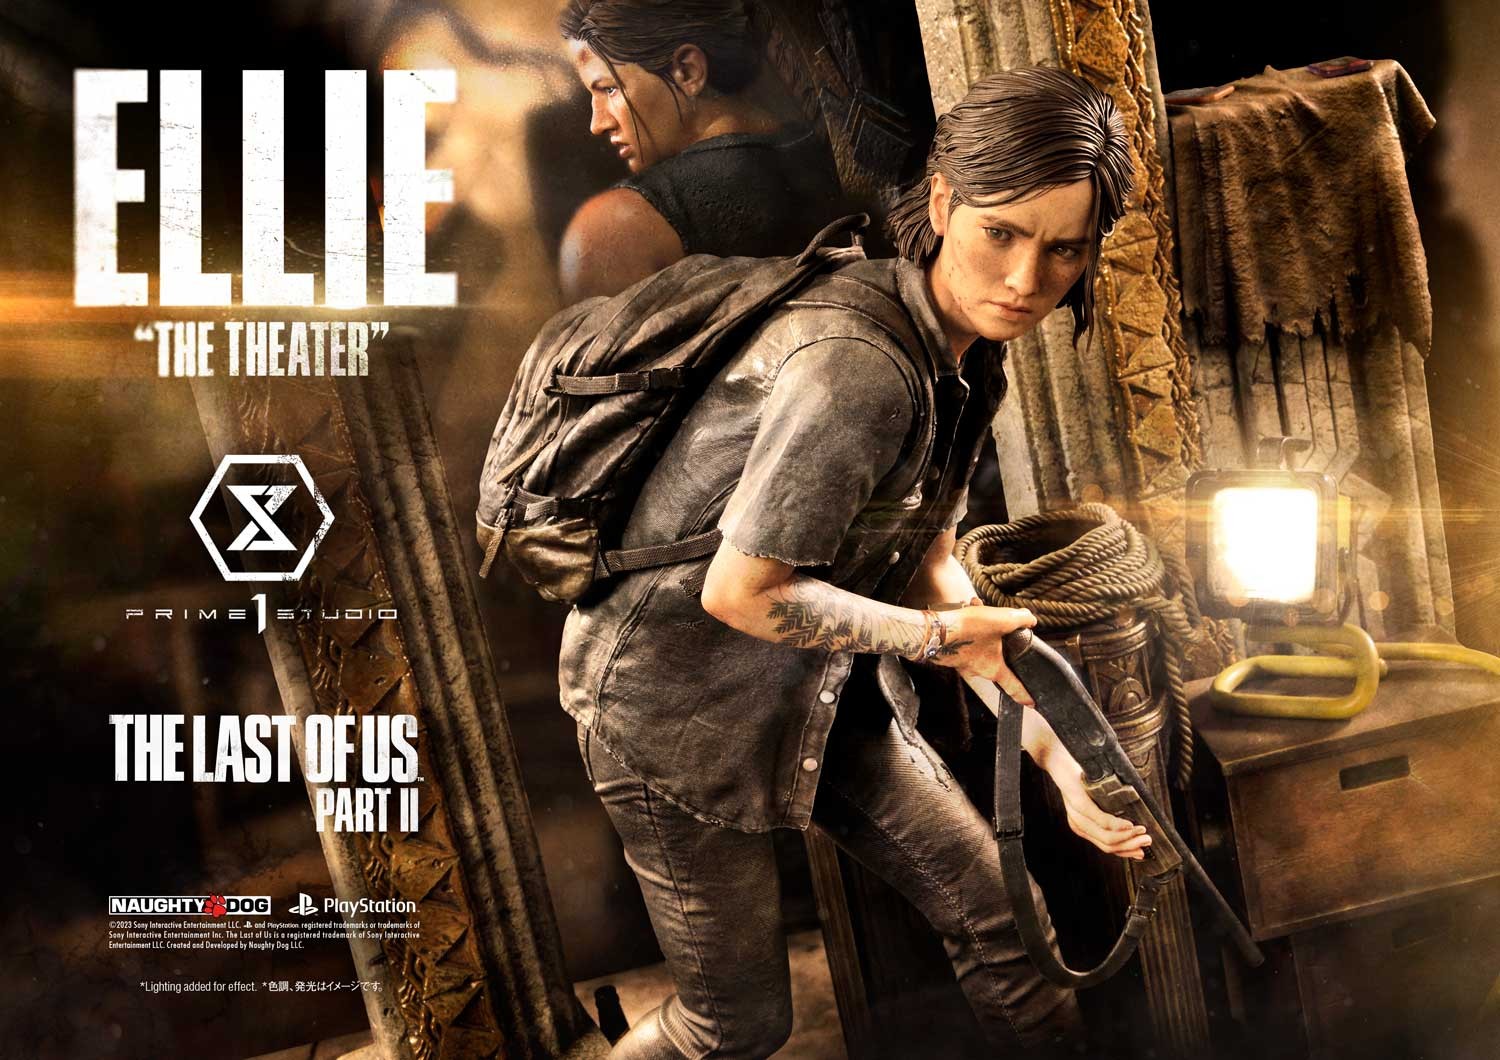 Ellie "The Theater"